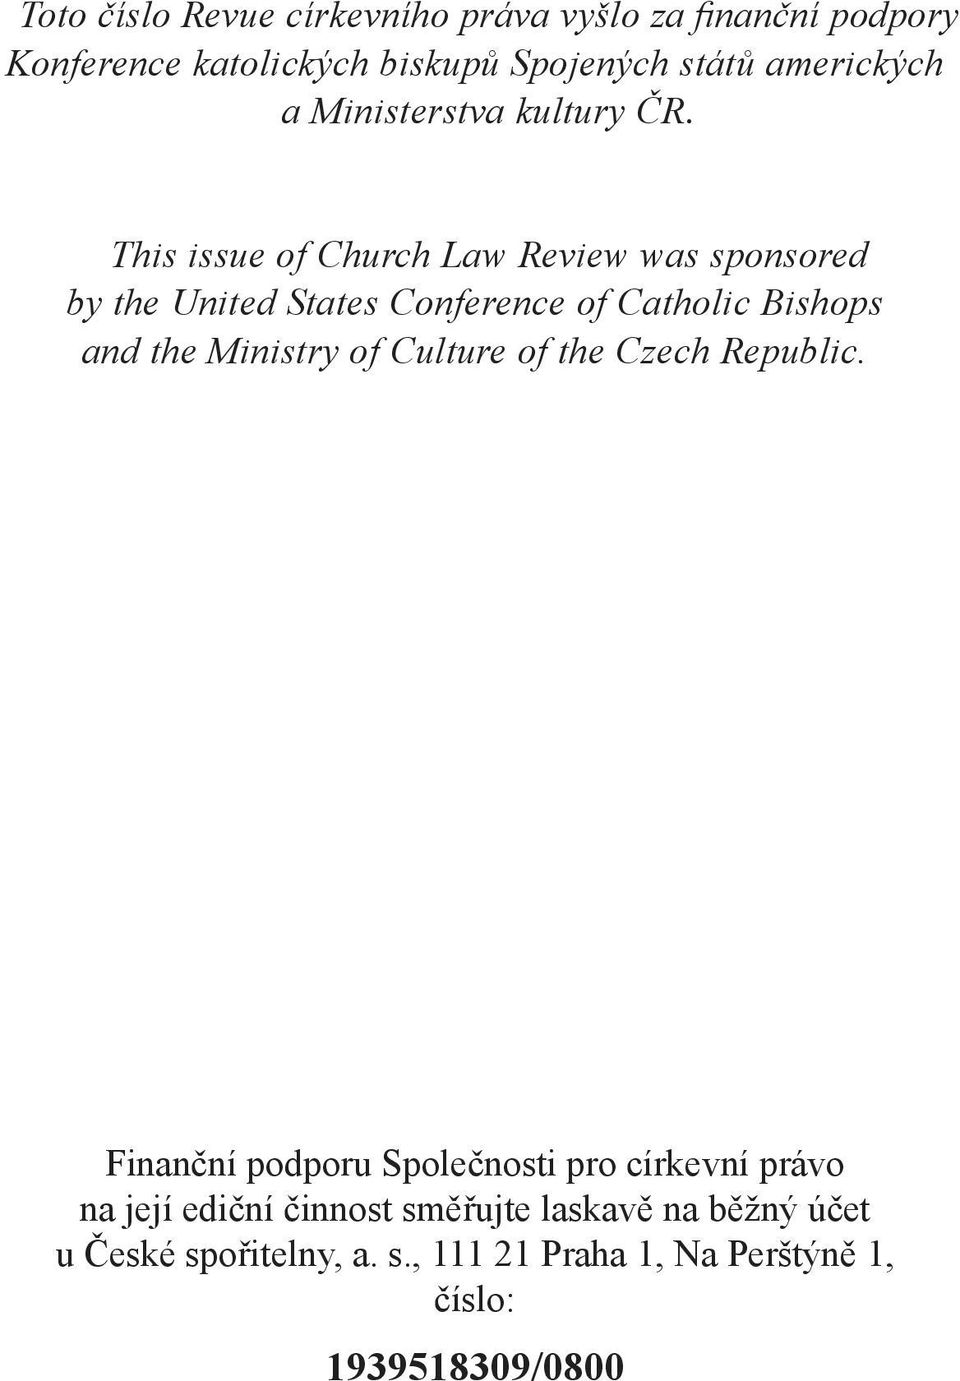 This issue of Church Law Review was sponsored by the United States Conference of Catholic Bishops and the Ministry of